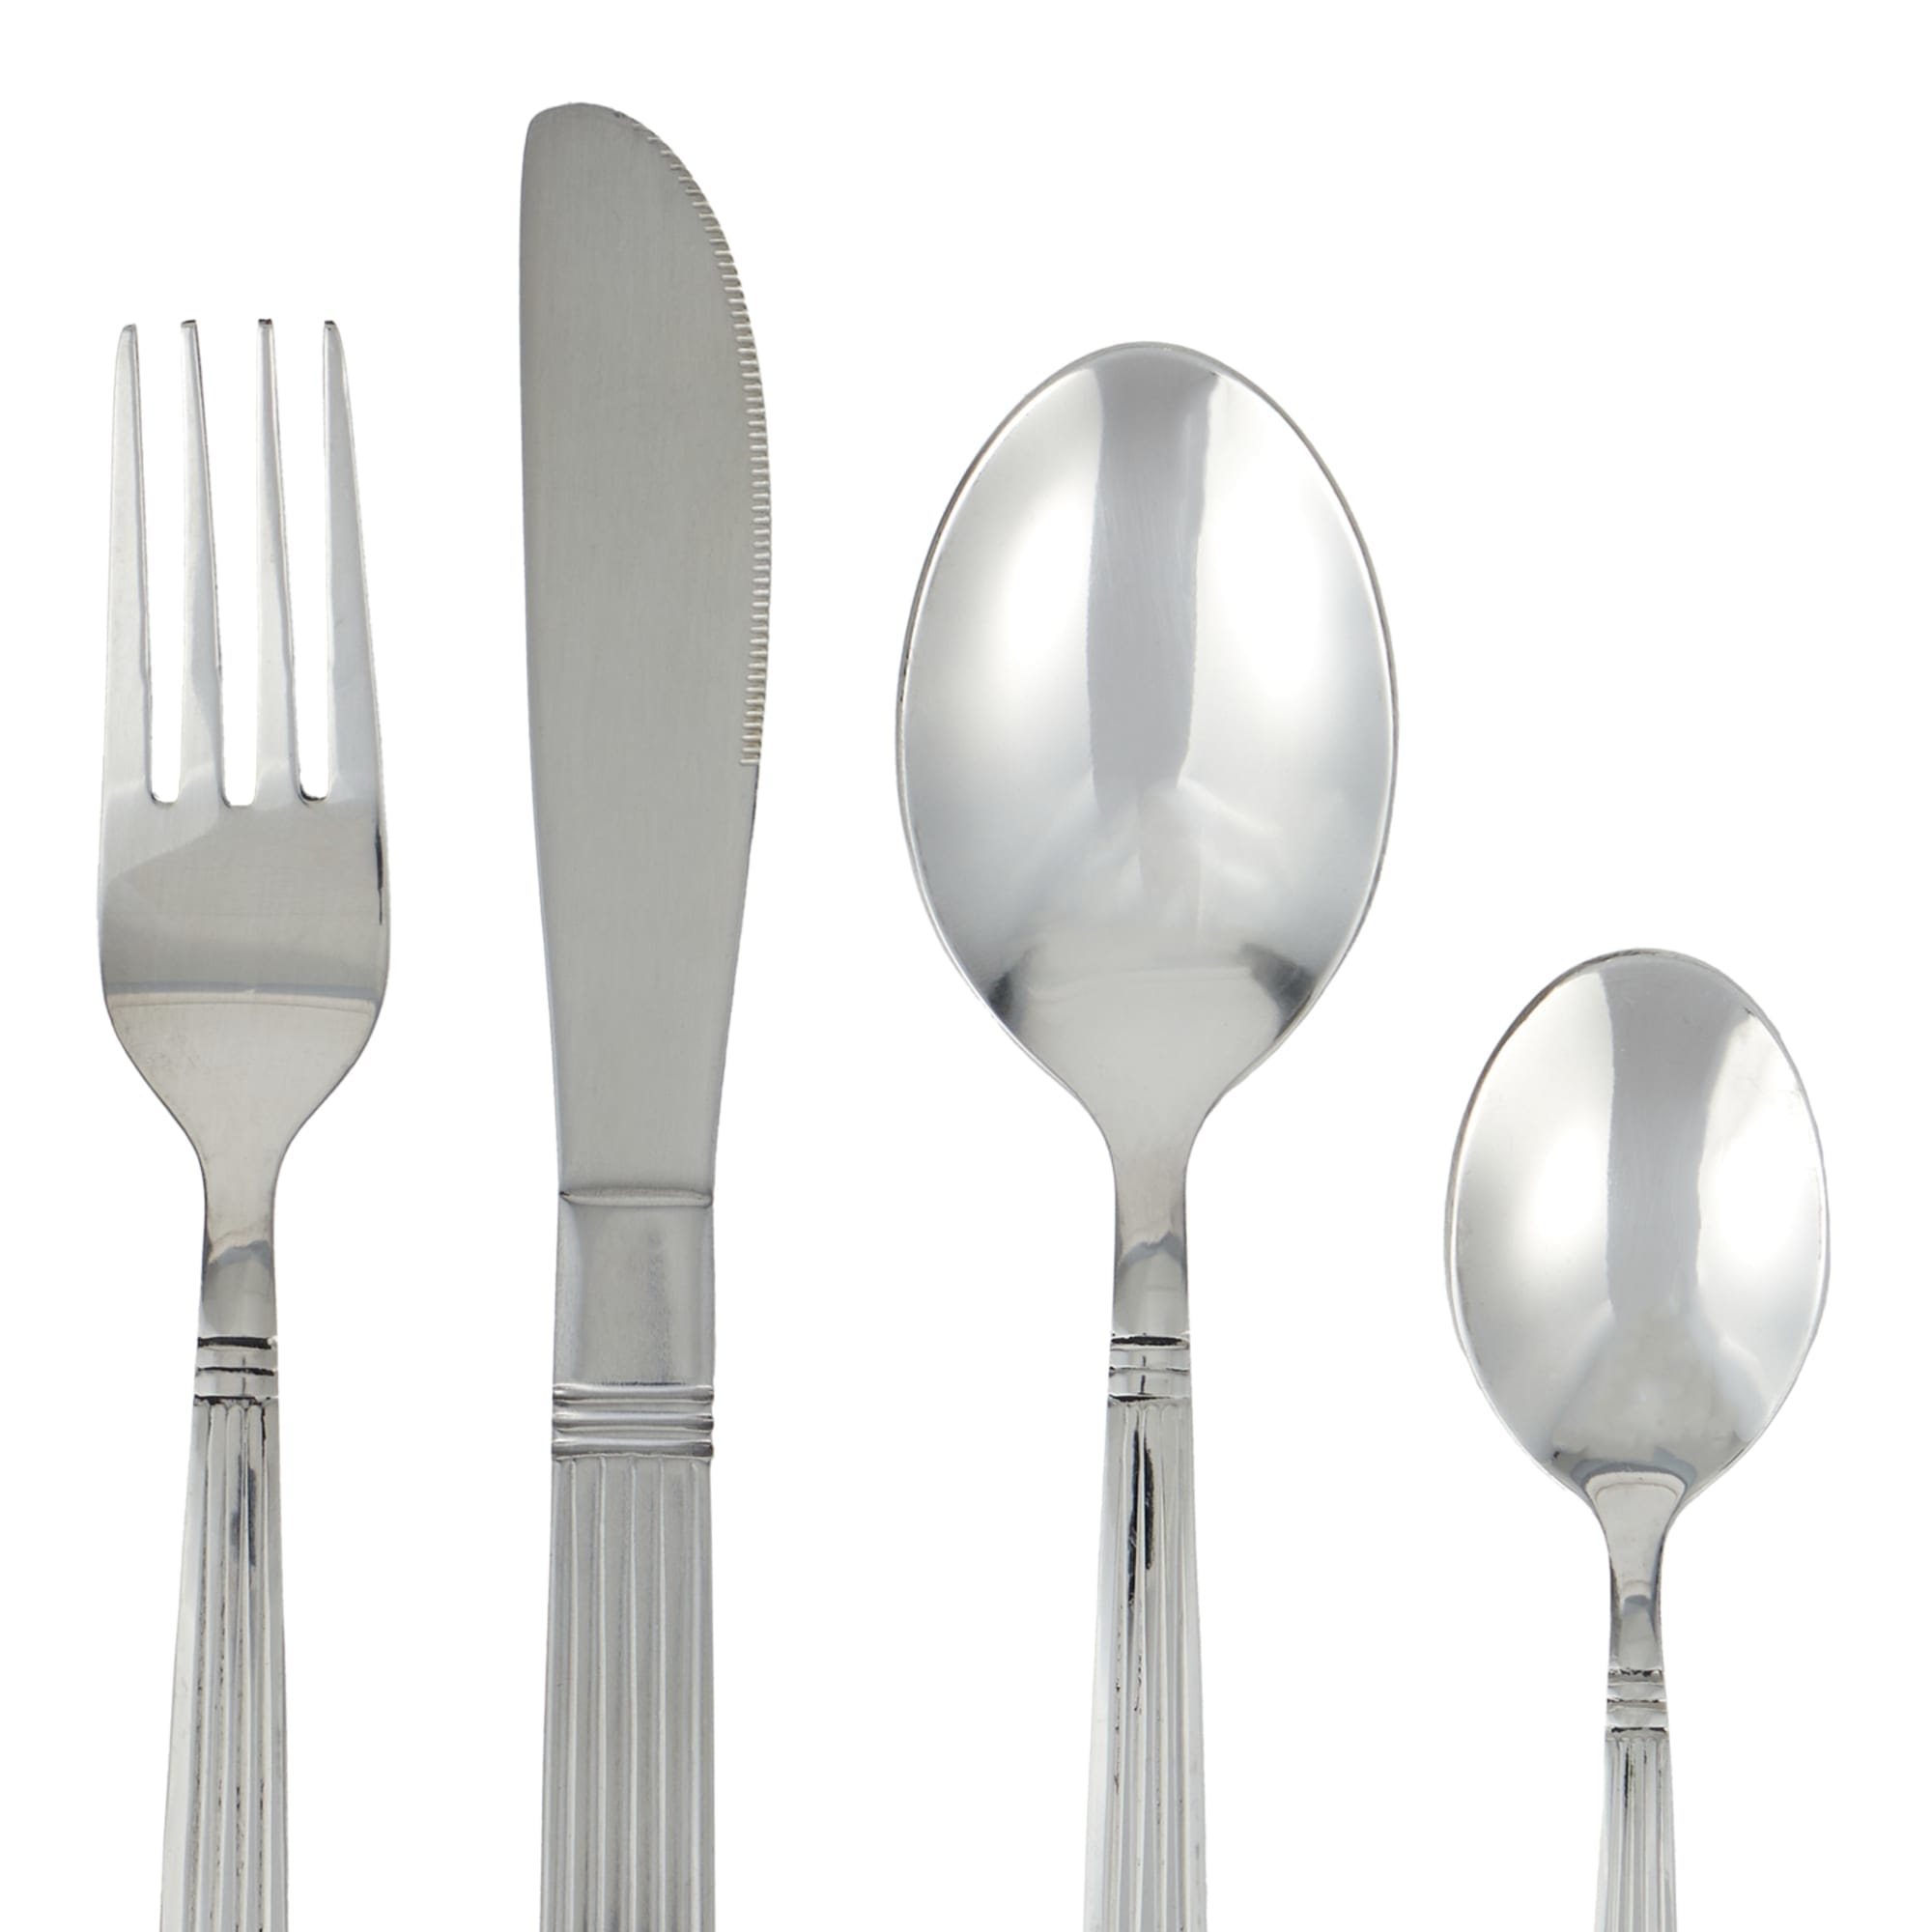 16-Piece Stainless Steel Flatware Set - 4 Table Settings, Includes Dinner Forks, Knives, Tablespoons, Teaspoons $8.00 EACH, CASE PACK OF 12